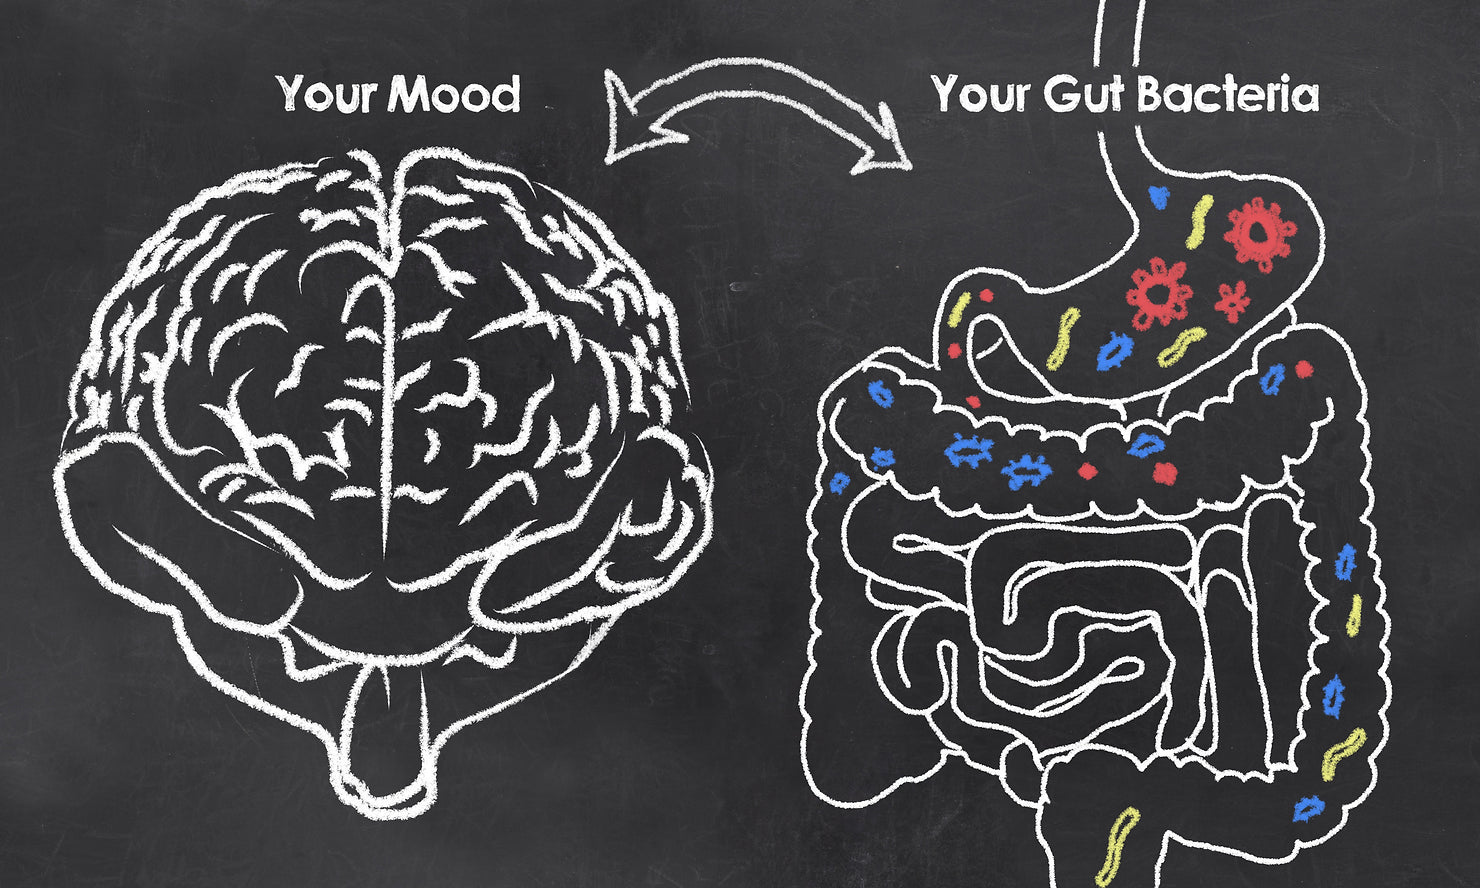 The Gut Brain Connection